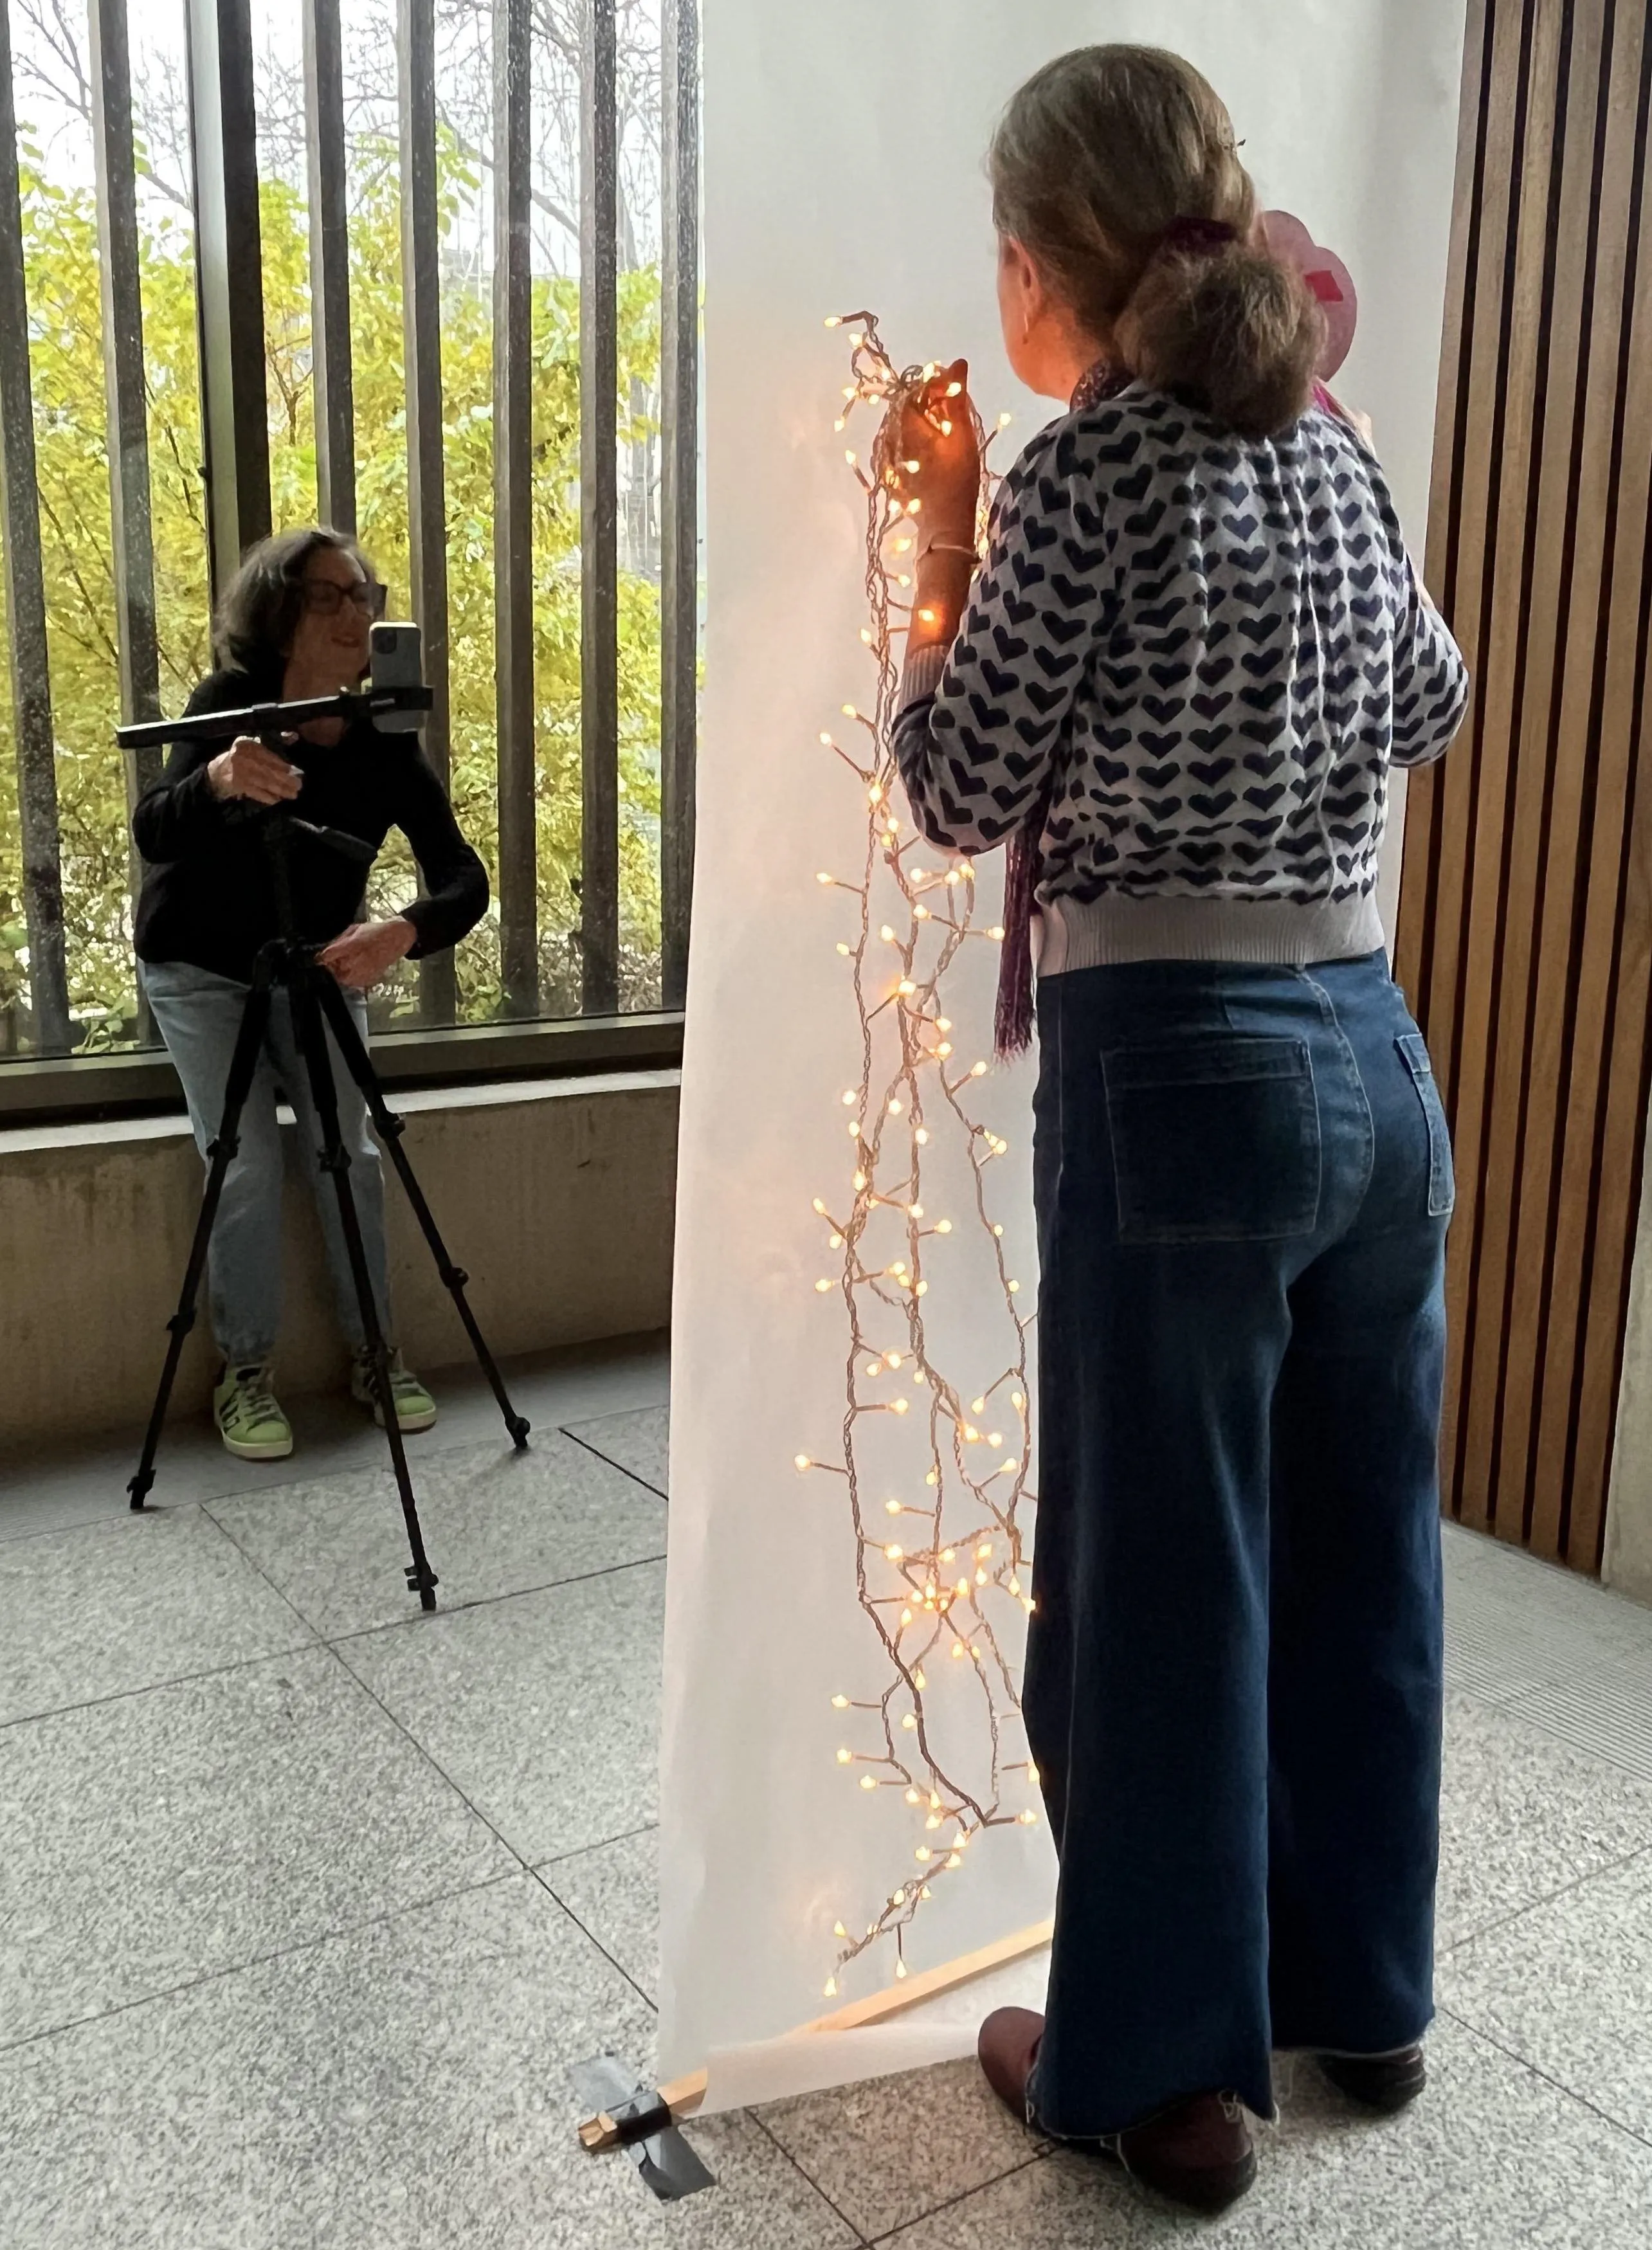 woman standing behind screen with fairy lights and another woman taking her photo with a smart phone